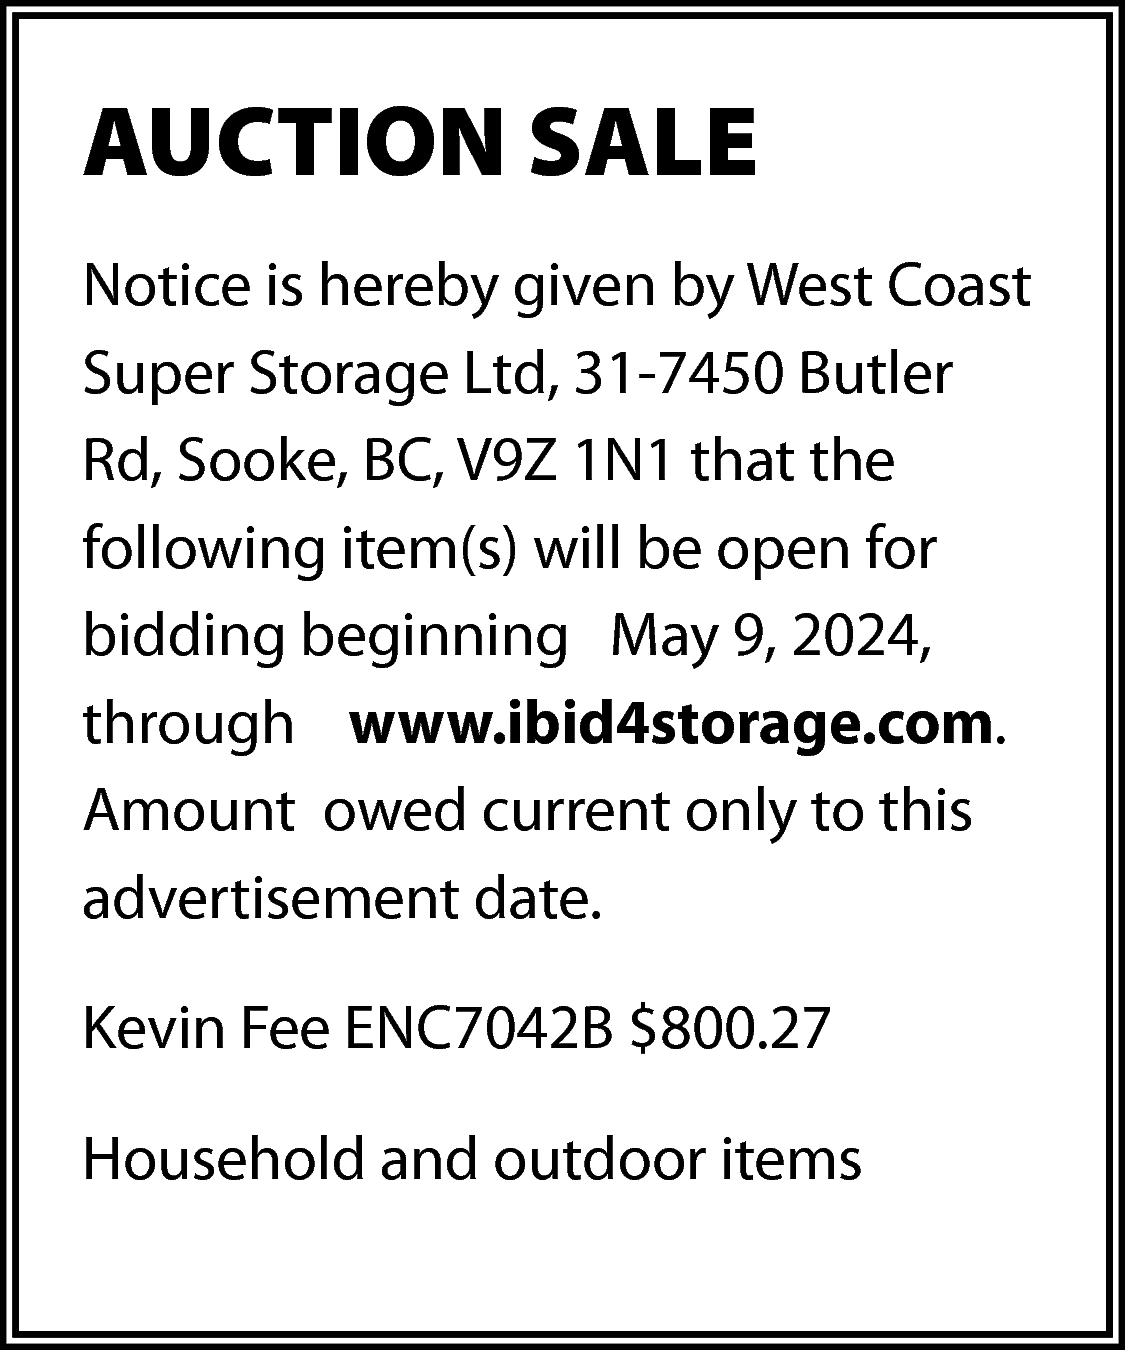 AUCTION SALE <br>Notice is hereby  AUCTION SALE  Notice is hereby given by West Coast  Super Storage Ltd, 31-7450 Butler  Rd, Sooke, BC, V9Z 1N1 that the  following item(s) will be open for  bidding beginning May 9, 2024,  through www.ibid4storage.com.  Amount owed current only to this  advertisement date.  Kevin Fee ENC7042B $800.27  Household and outdoor items    